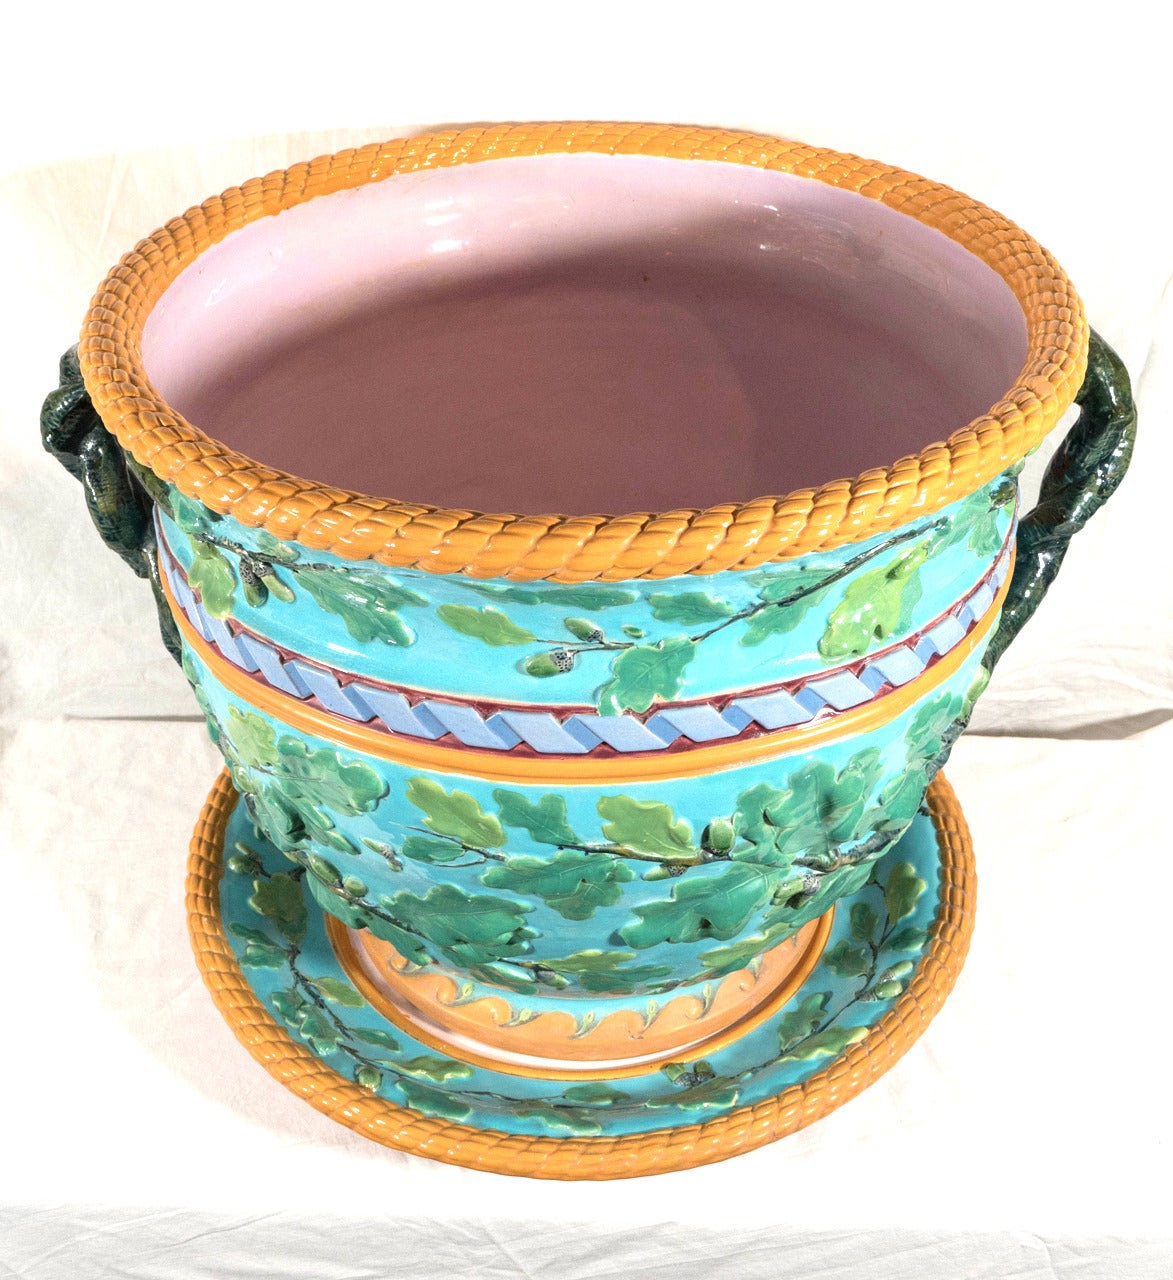 Victorian Large Minton Antique Majolica Planter with Green Leaves on a Turquoise Ground